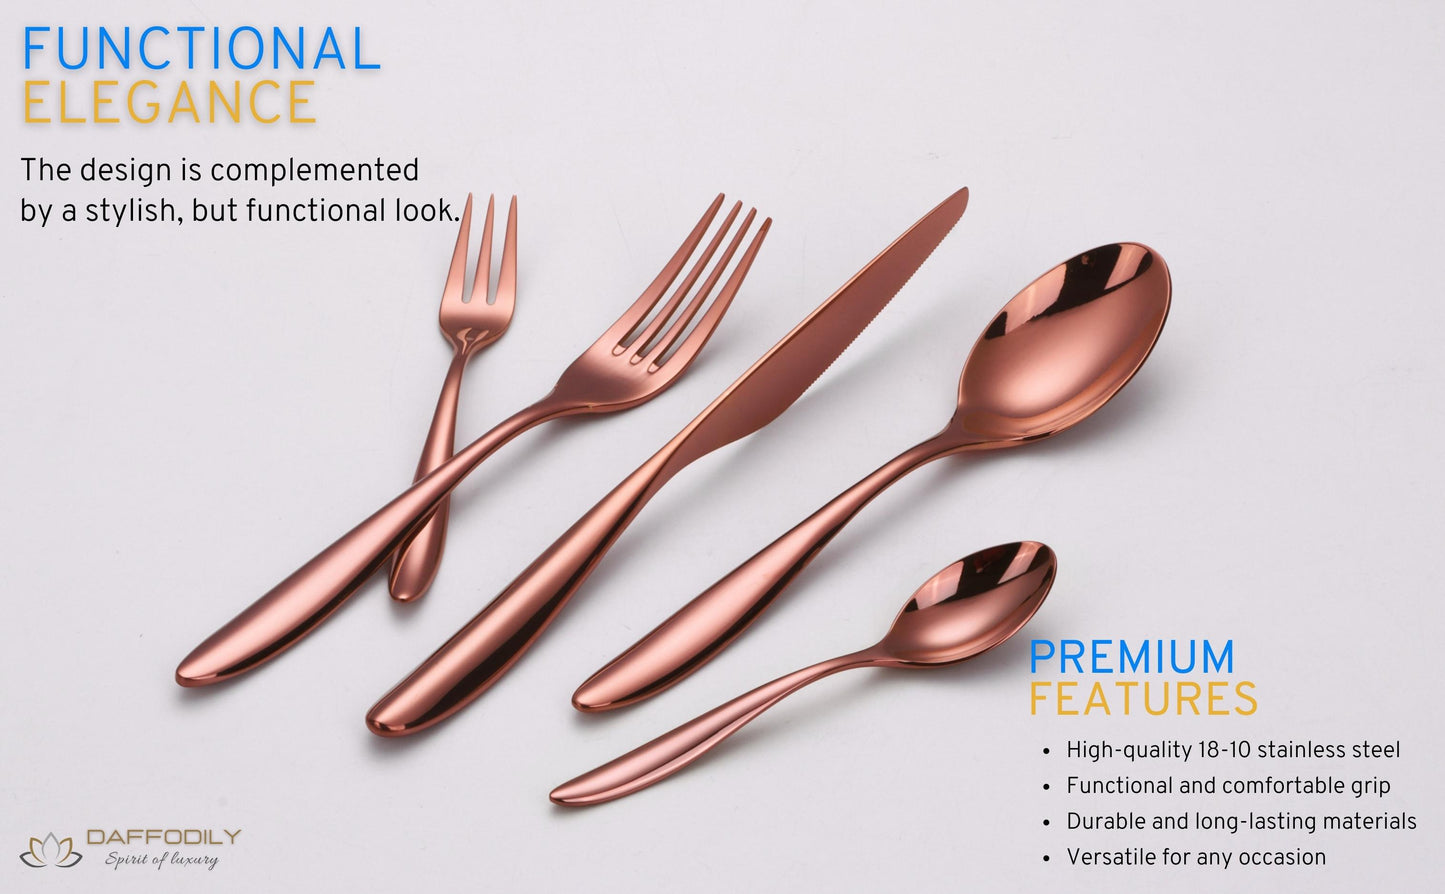 Stylish and functional cutlery sets for dinner parties and events